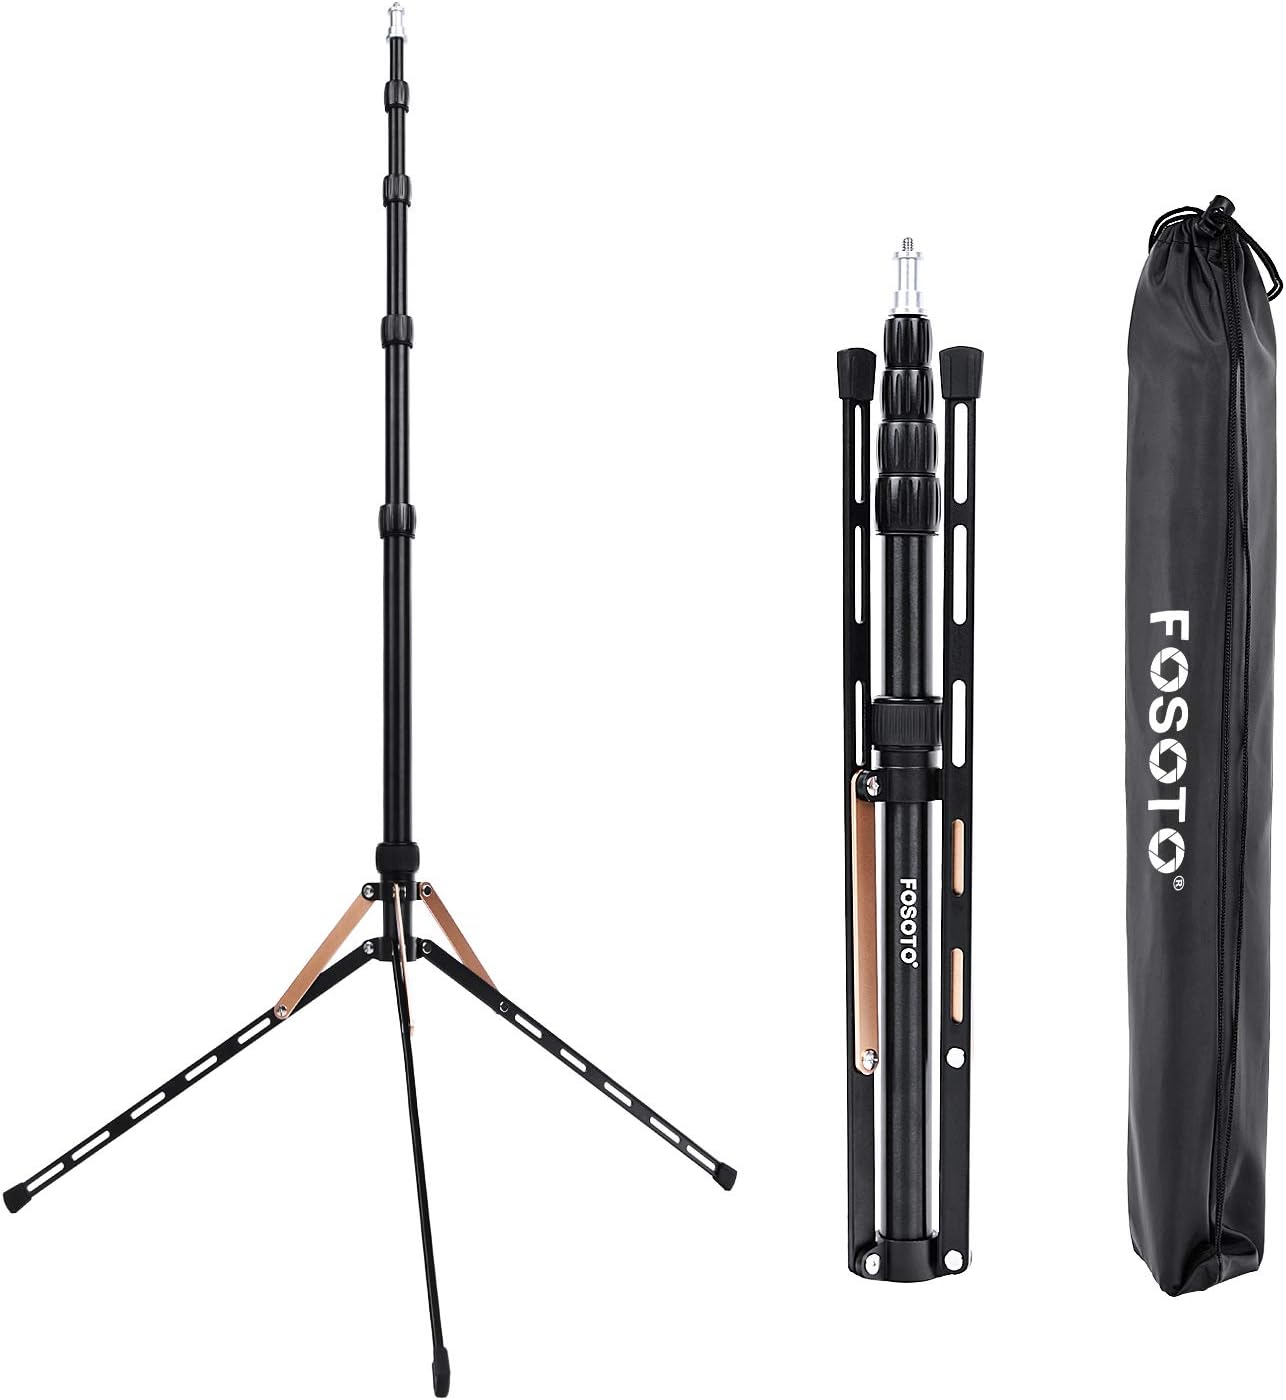 FOSOTO FT-190B 87in Aluminum Alloy Photography LED Light Tripod Stand for Photo Studio Ring Photographic Light, DSLR Cameras, Softbox, Umbrella, Flash, Portrait Shooting Lighting Stand